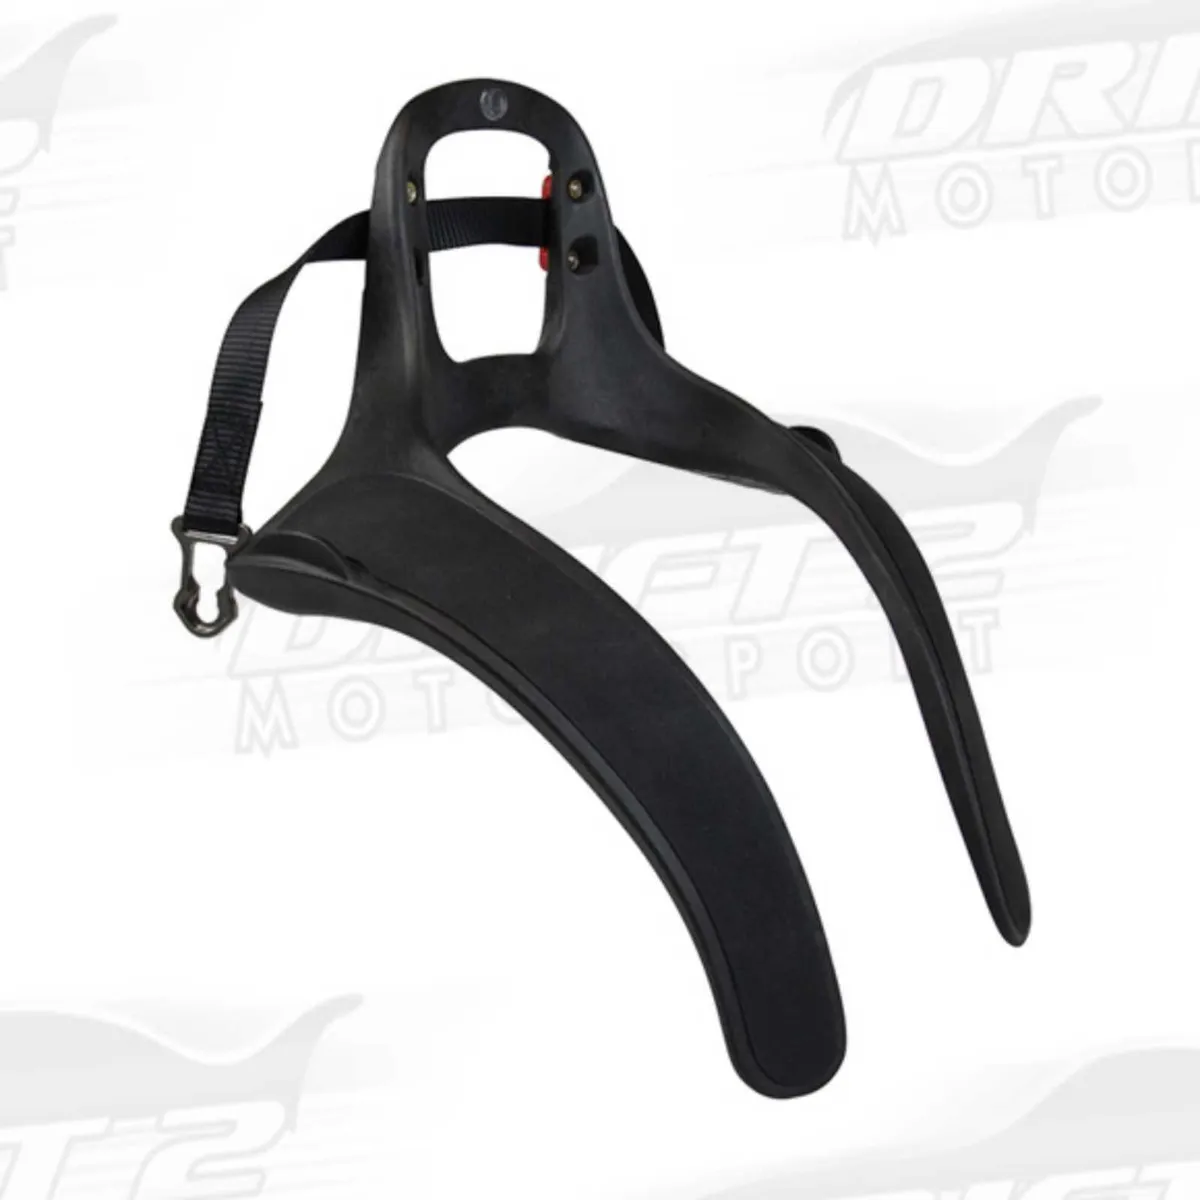 Stand21 Hans Device